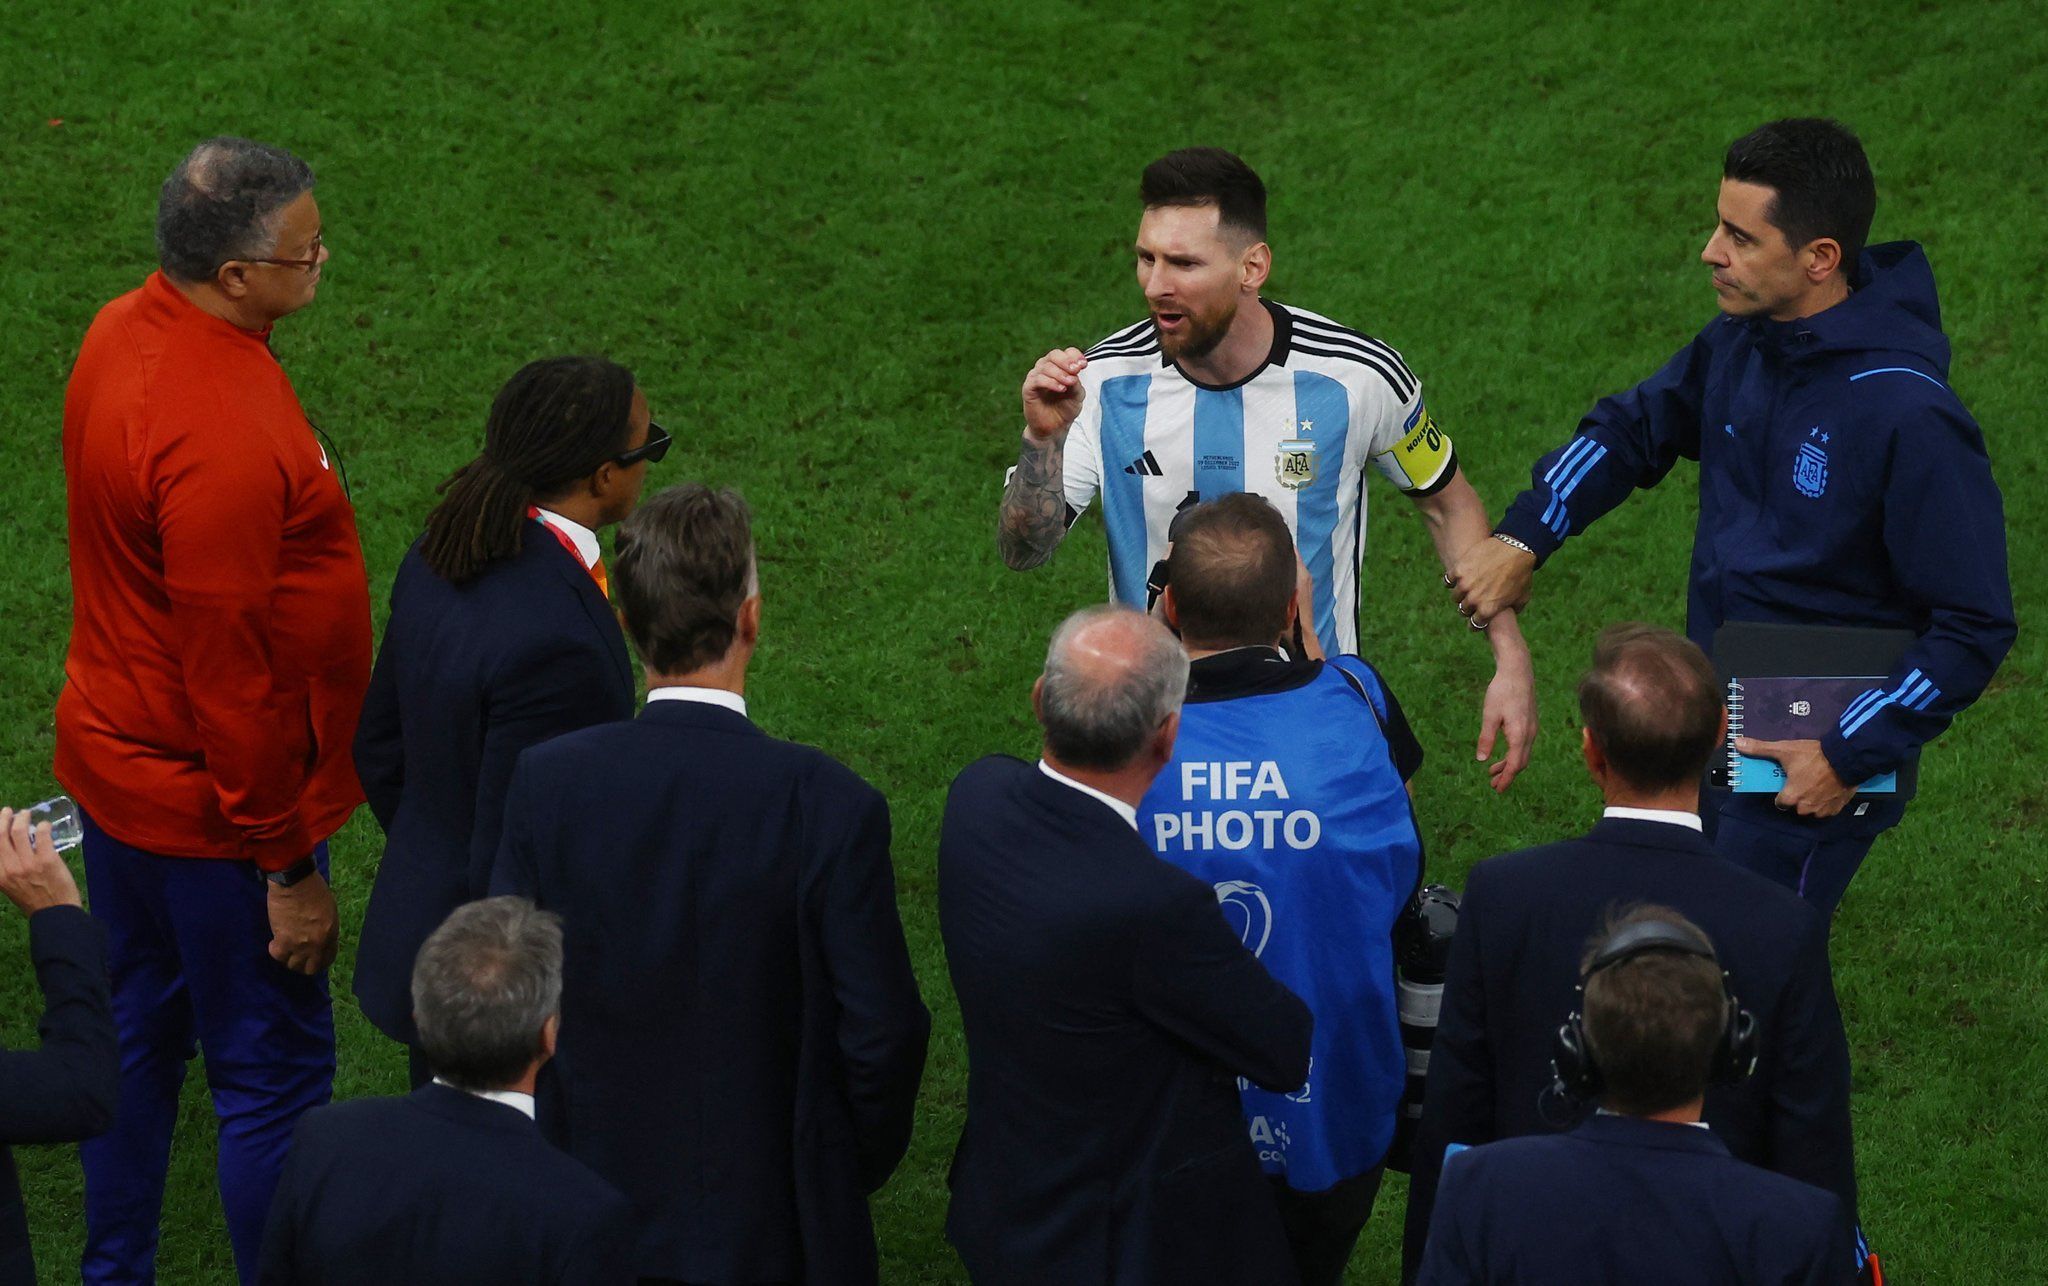 Angry Lionel Messi tells the Netherlands coach Louis van Gaal he talks too much after quarterfinal victory